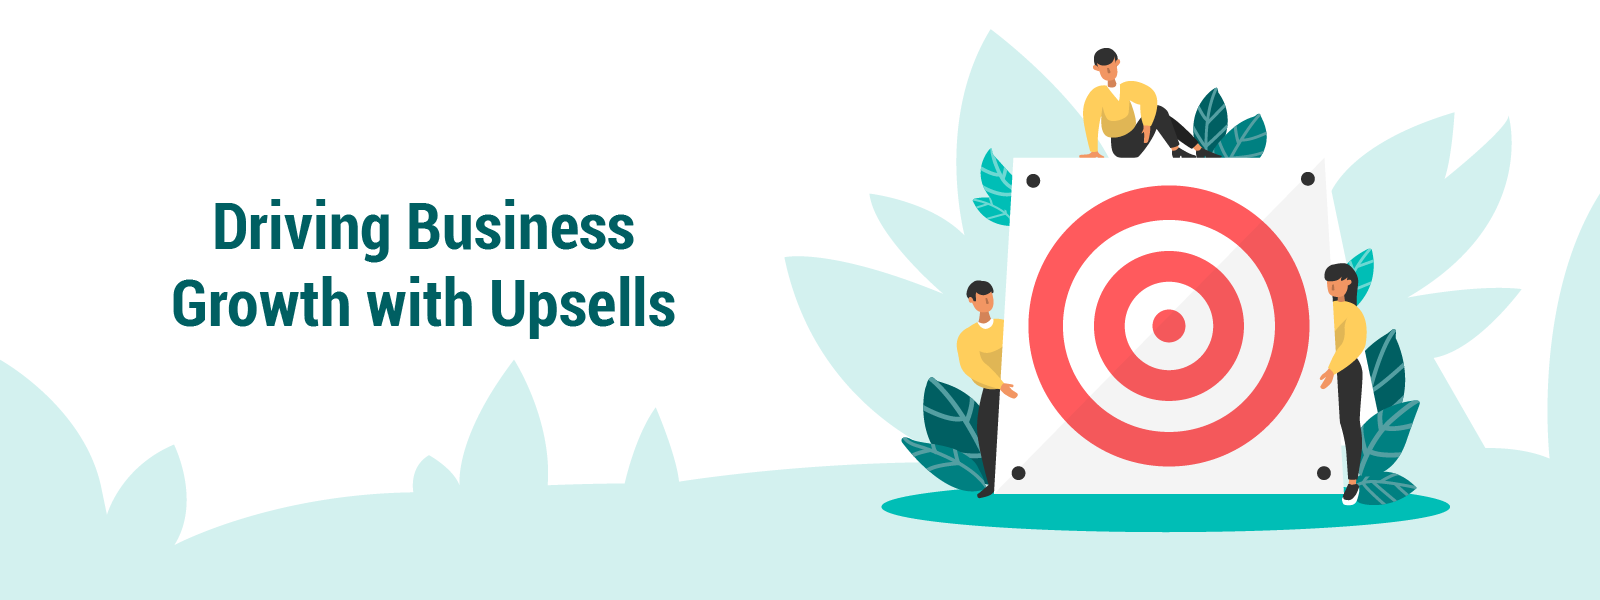 Driving Business Growth with Upsells